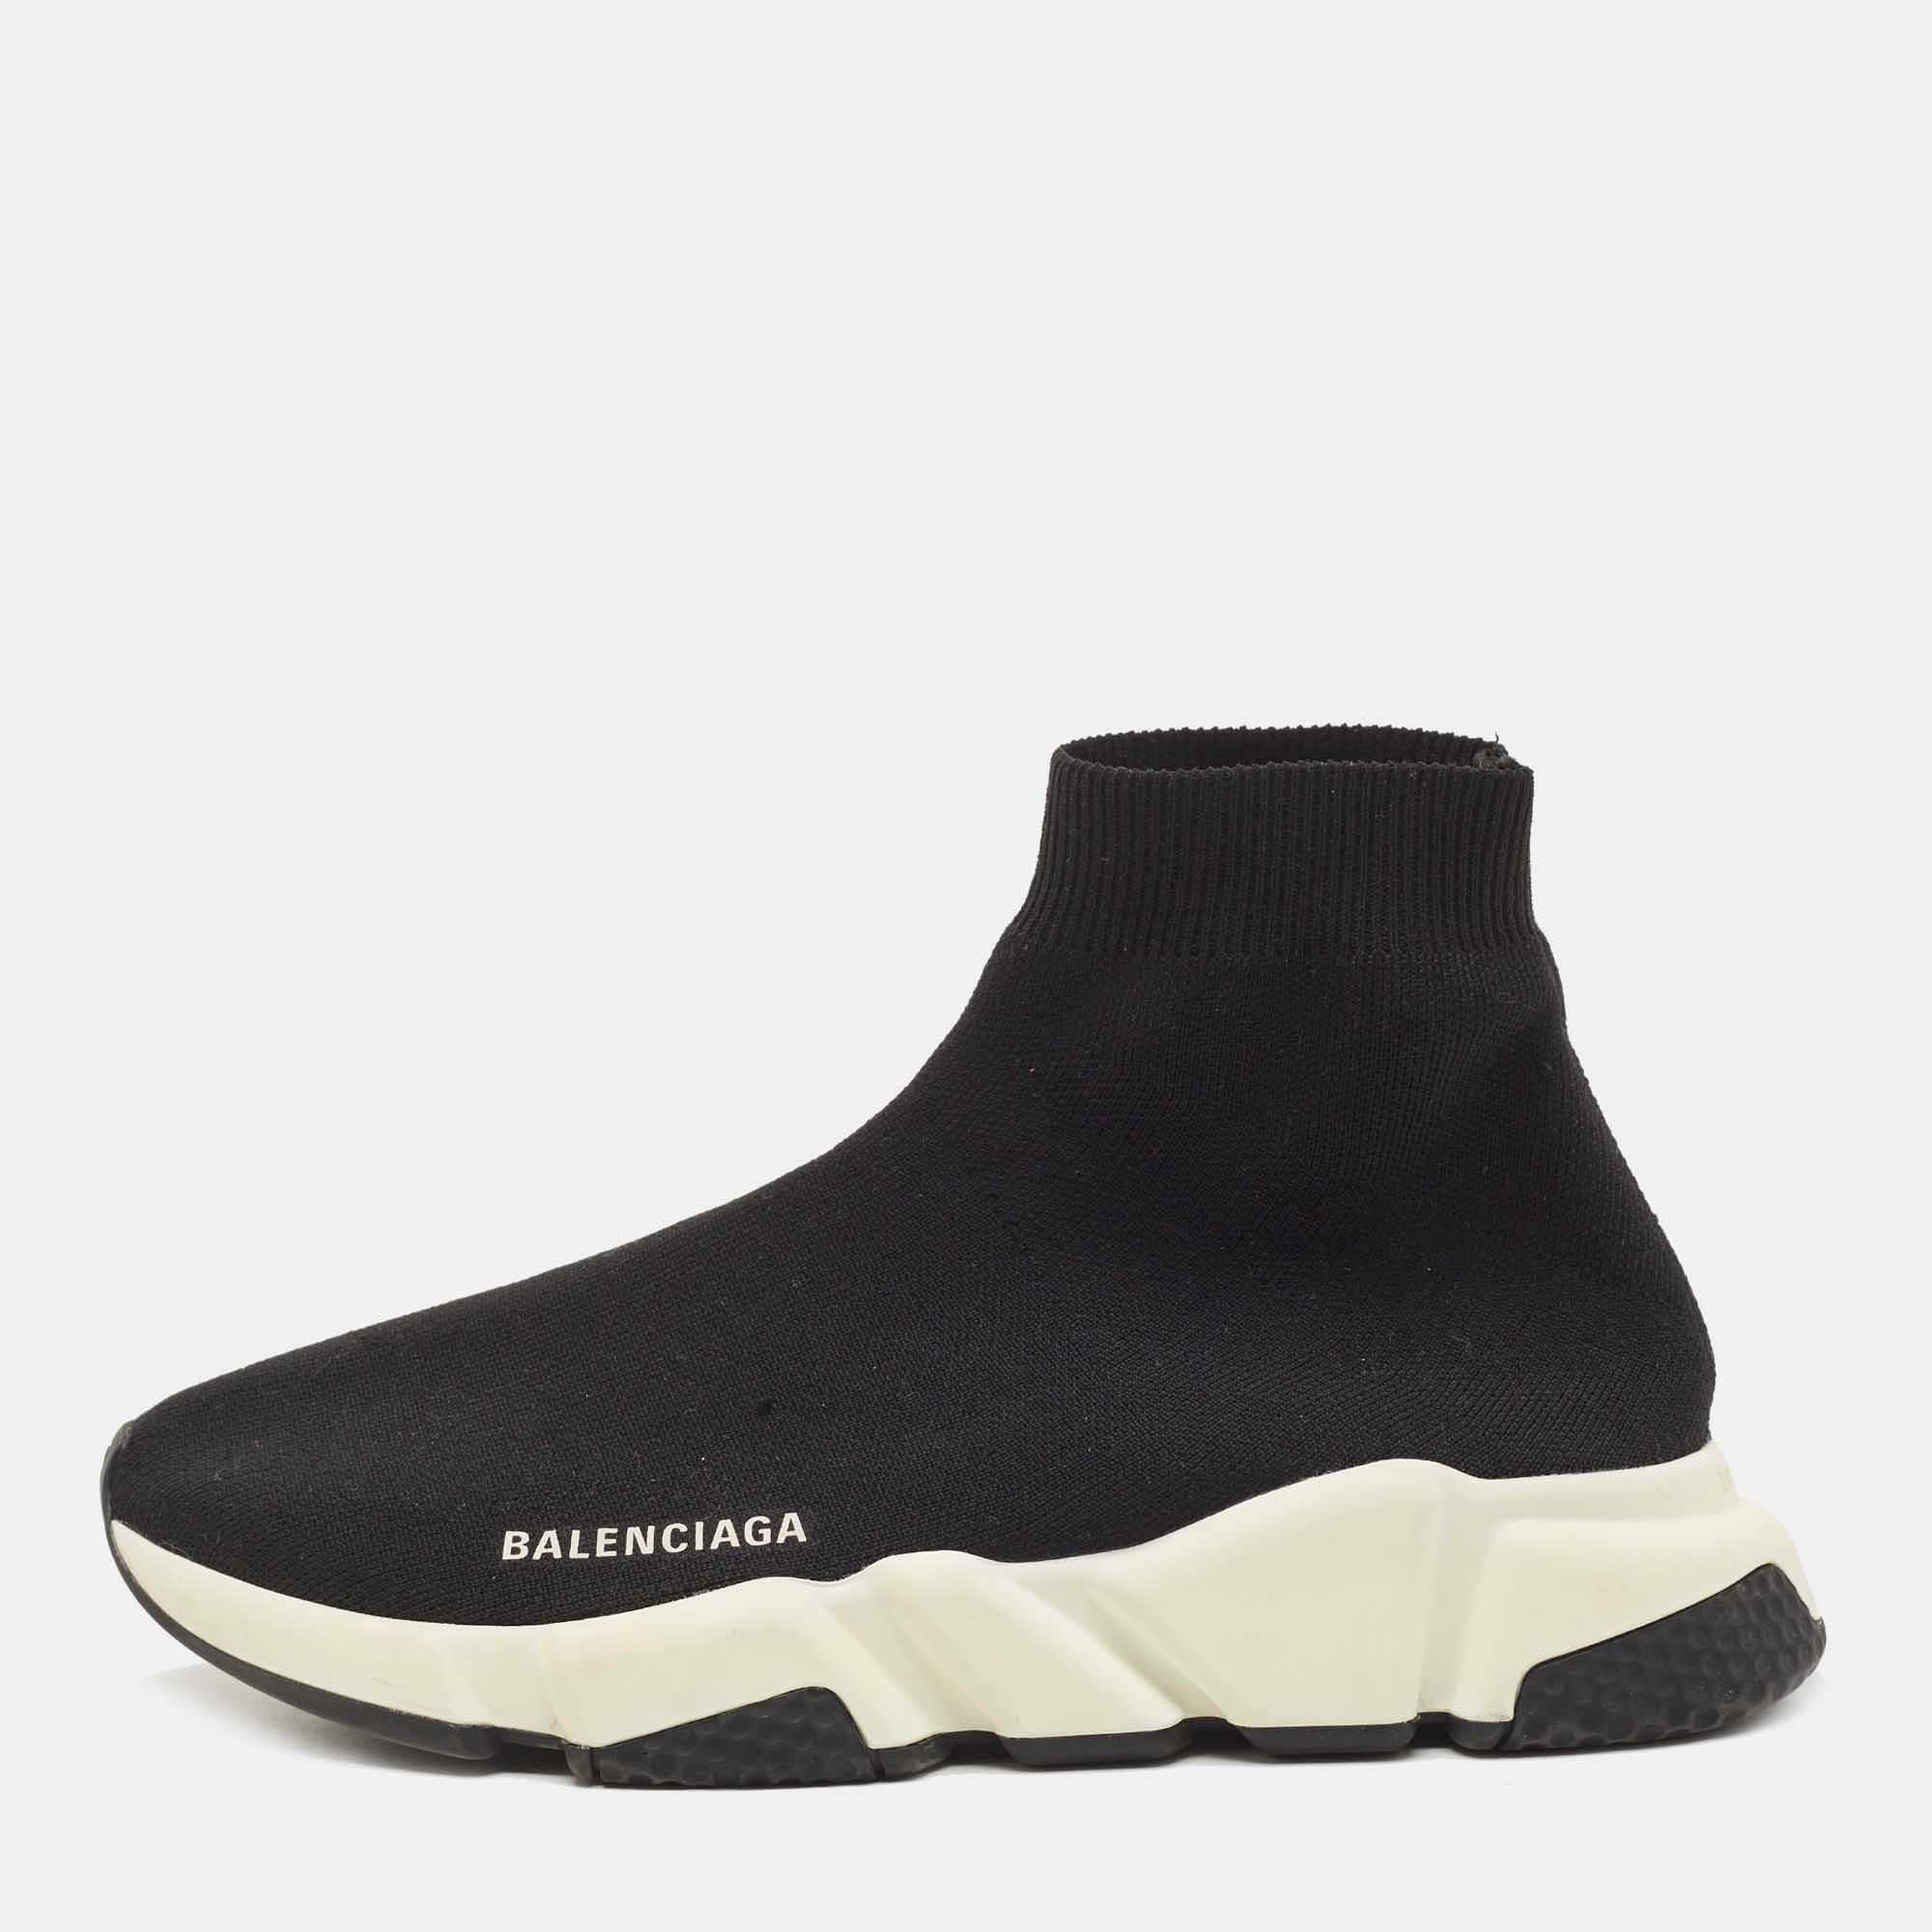 Balenciaga Black Knit Fabric Speed Trainer High Top Sneakers Size 40 4